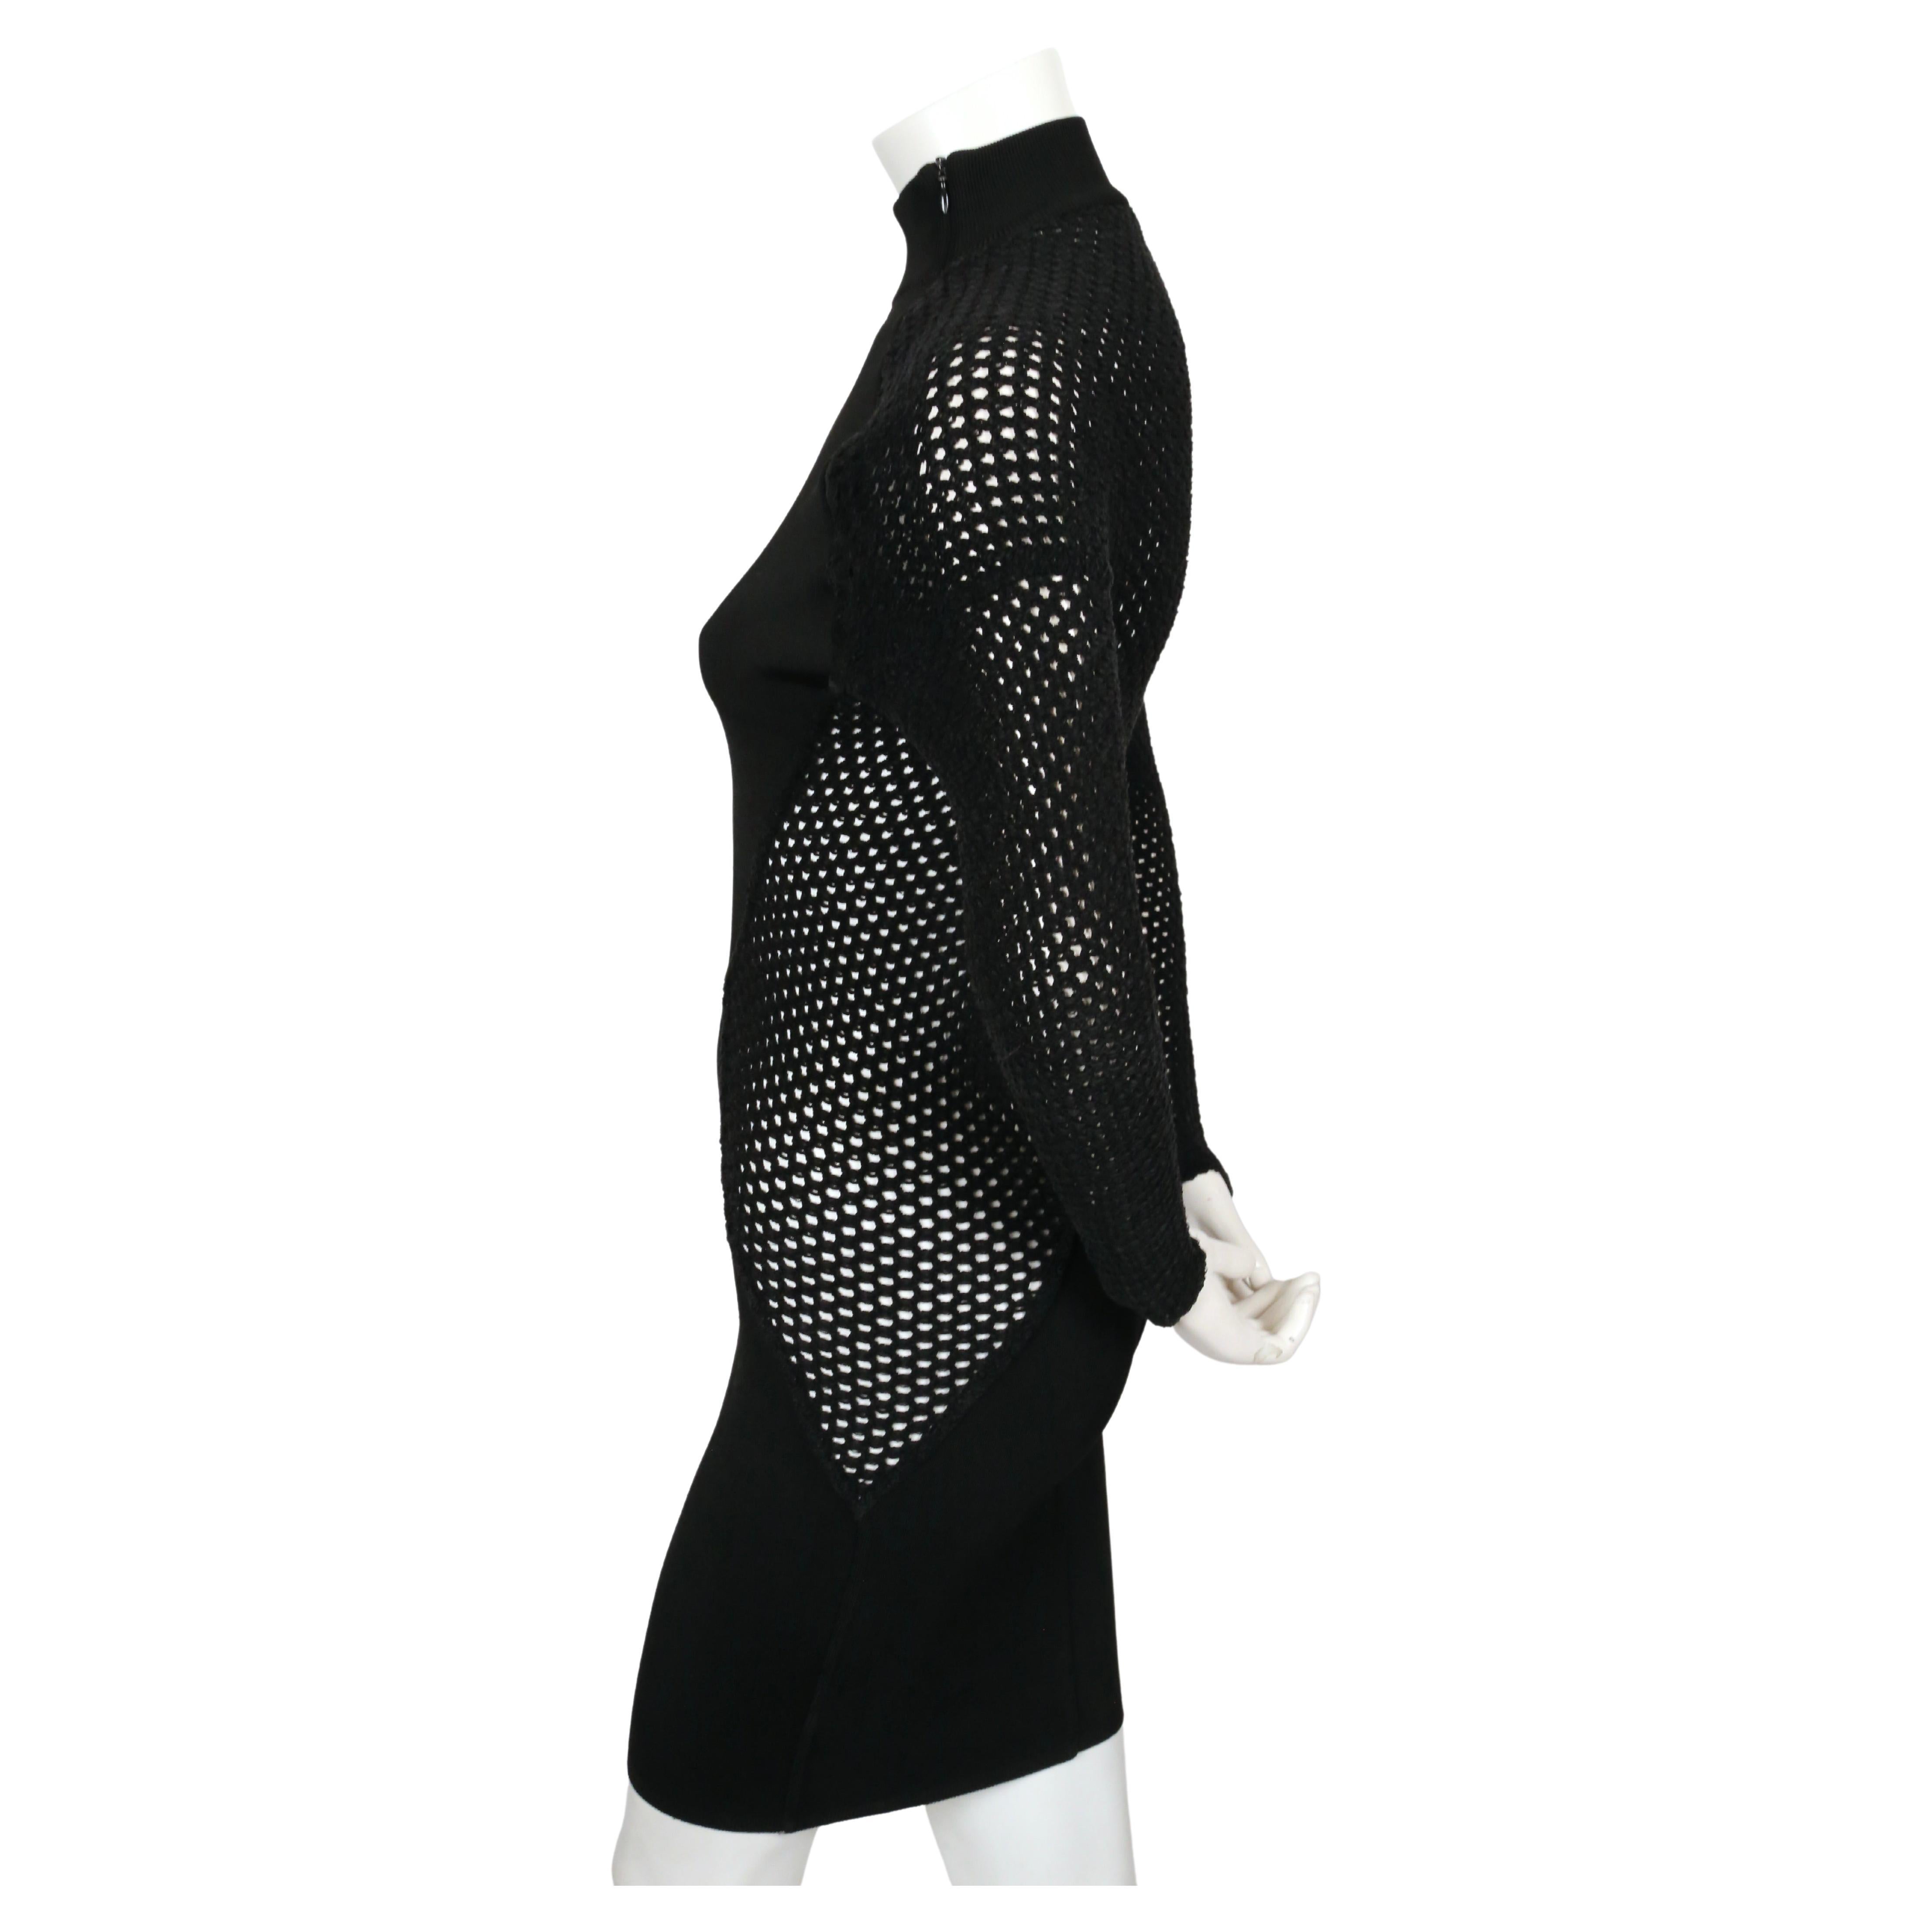 1989 AZZEDINE ALAIA black RUNWAY dress with sheer chenille panels In Good Condition For Sale In San Fransisco, CA